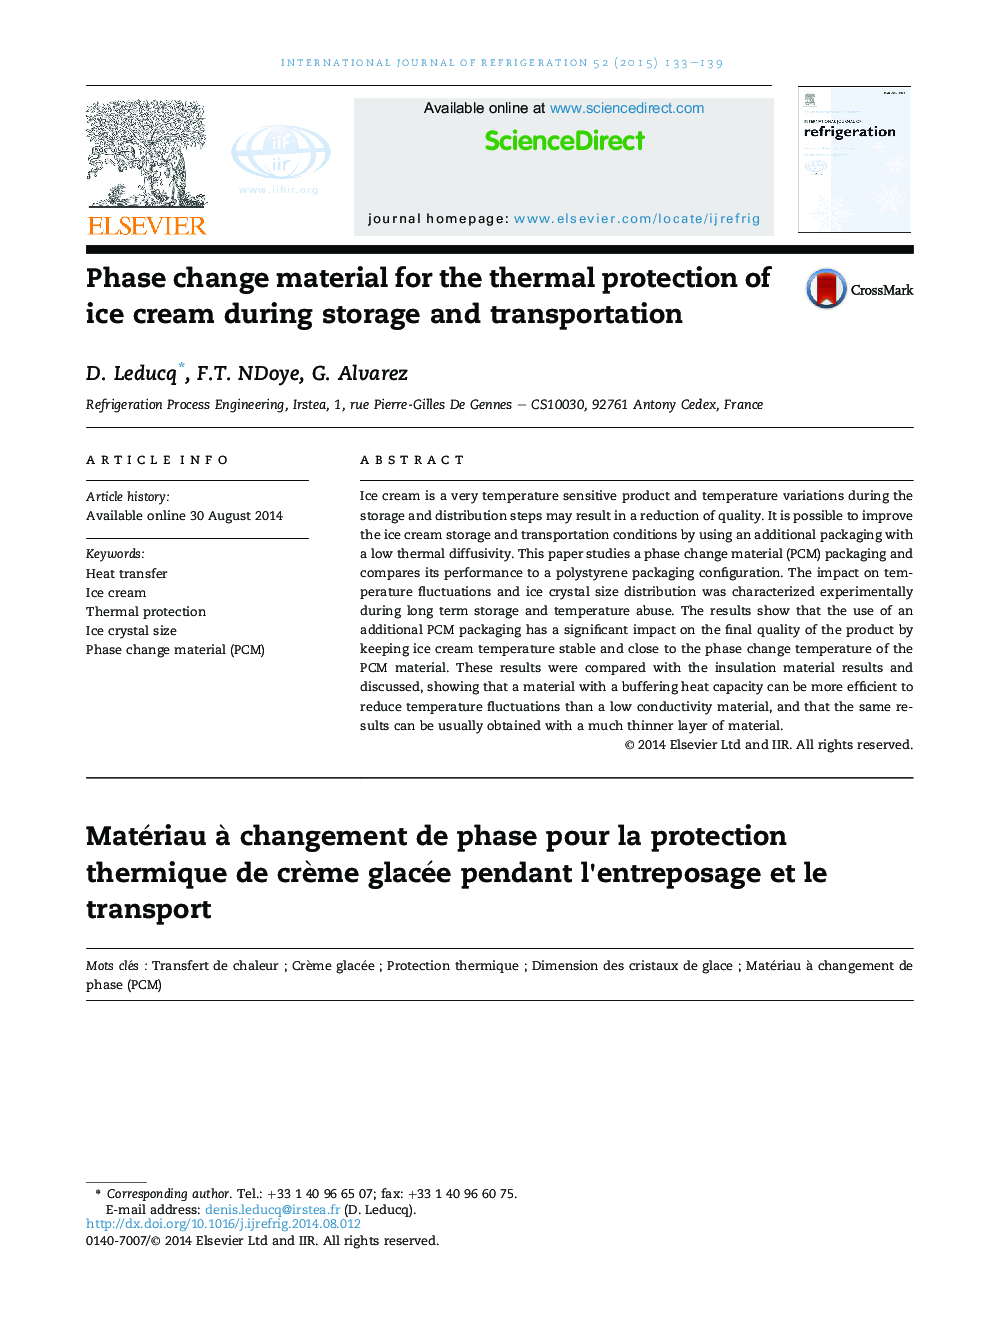 Phase change material for the thermal protection of ice cream during storage and transportation